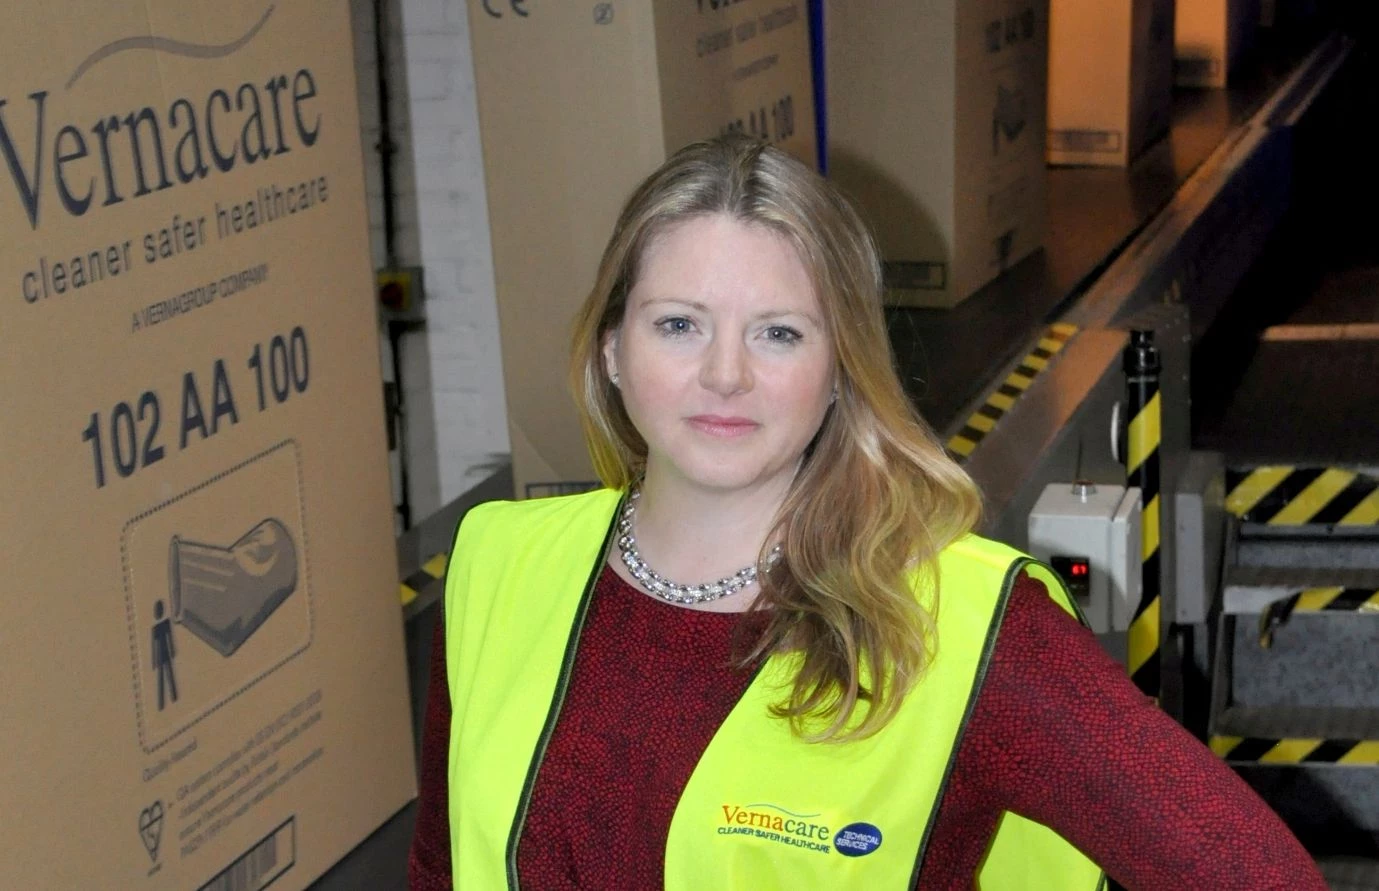 Global Marketing Director Emma Sheldon oversees the dispatch of Vernacare's single use disposable pr